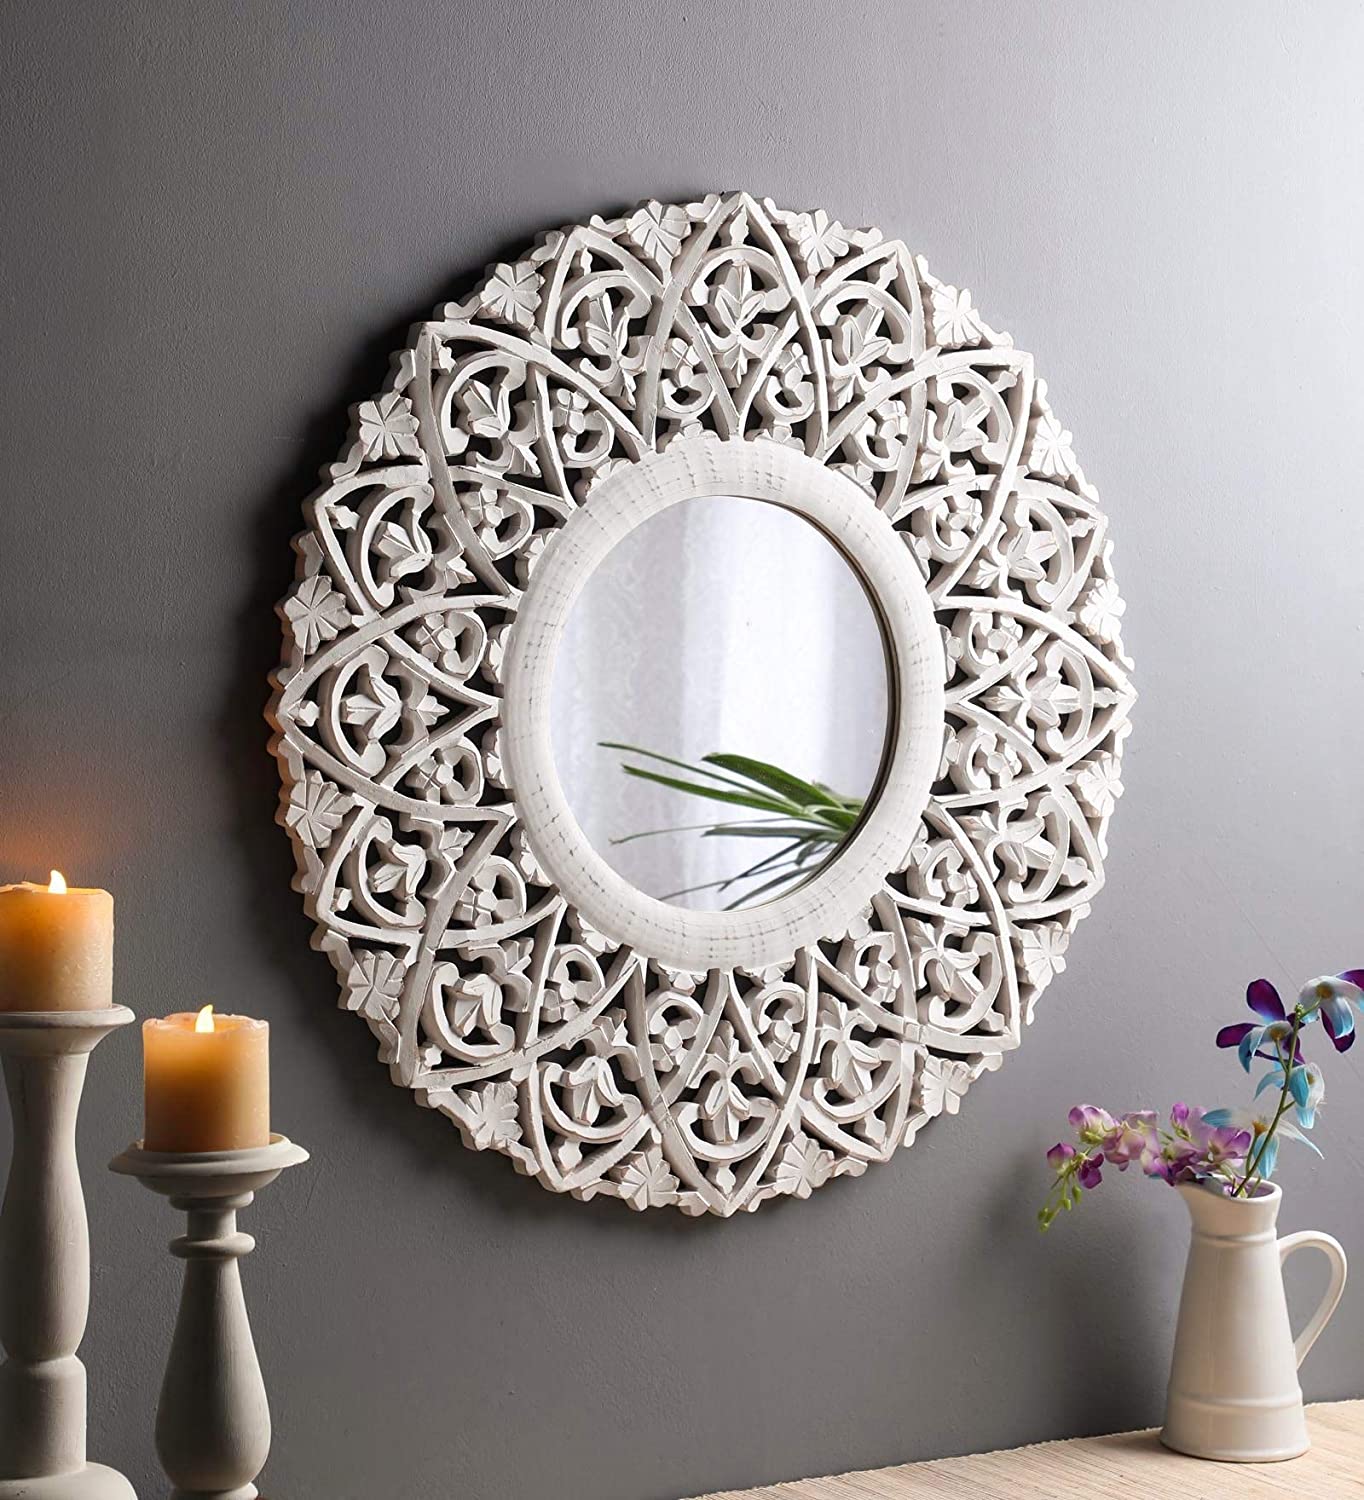 Wood Hand Crafted Round Distressed White Finished Vanity Wall Mount Mirror  27X27 Inches, Framed